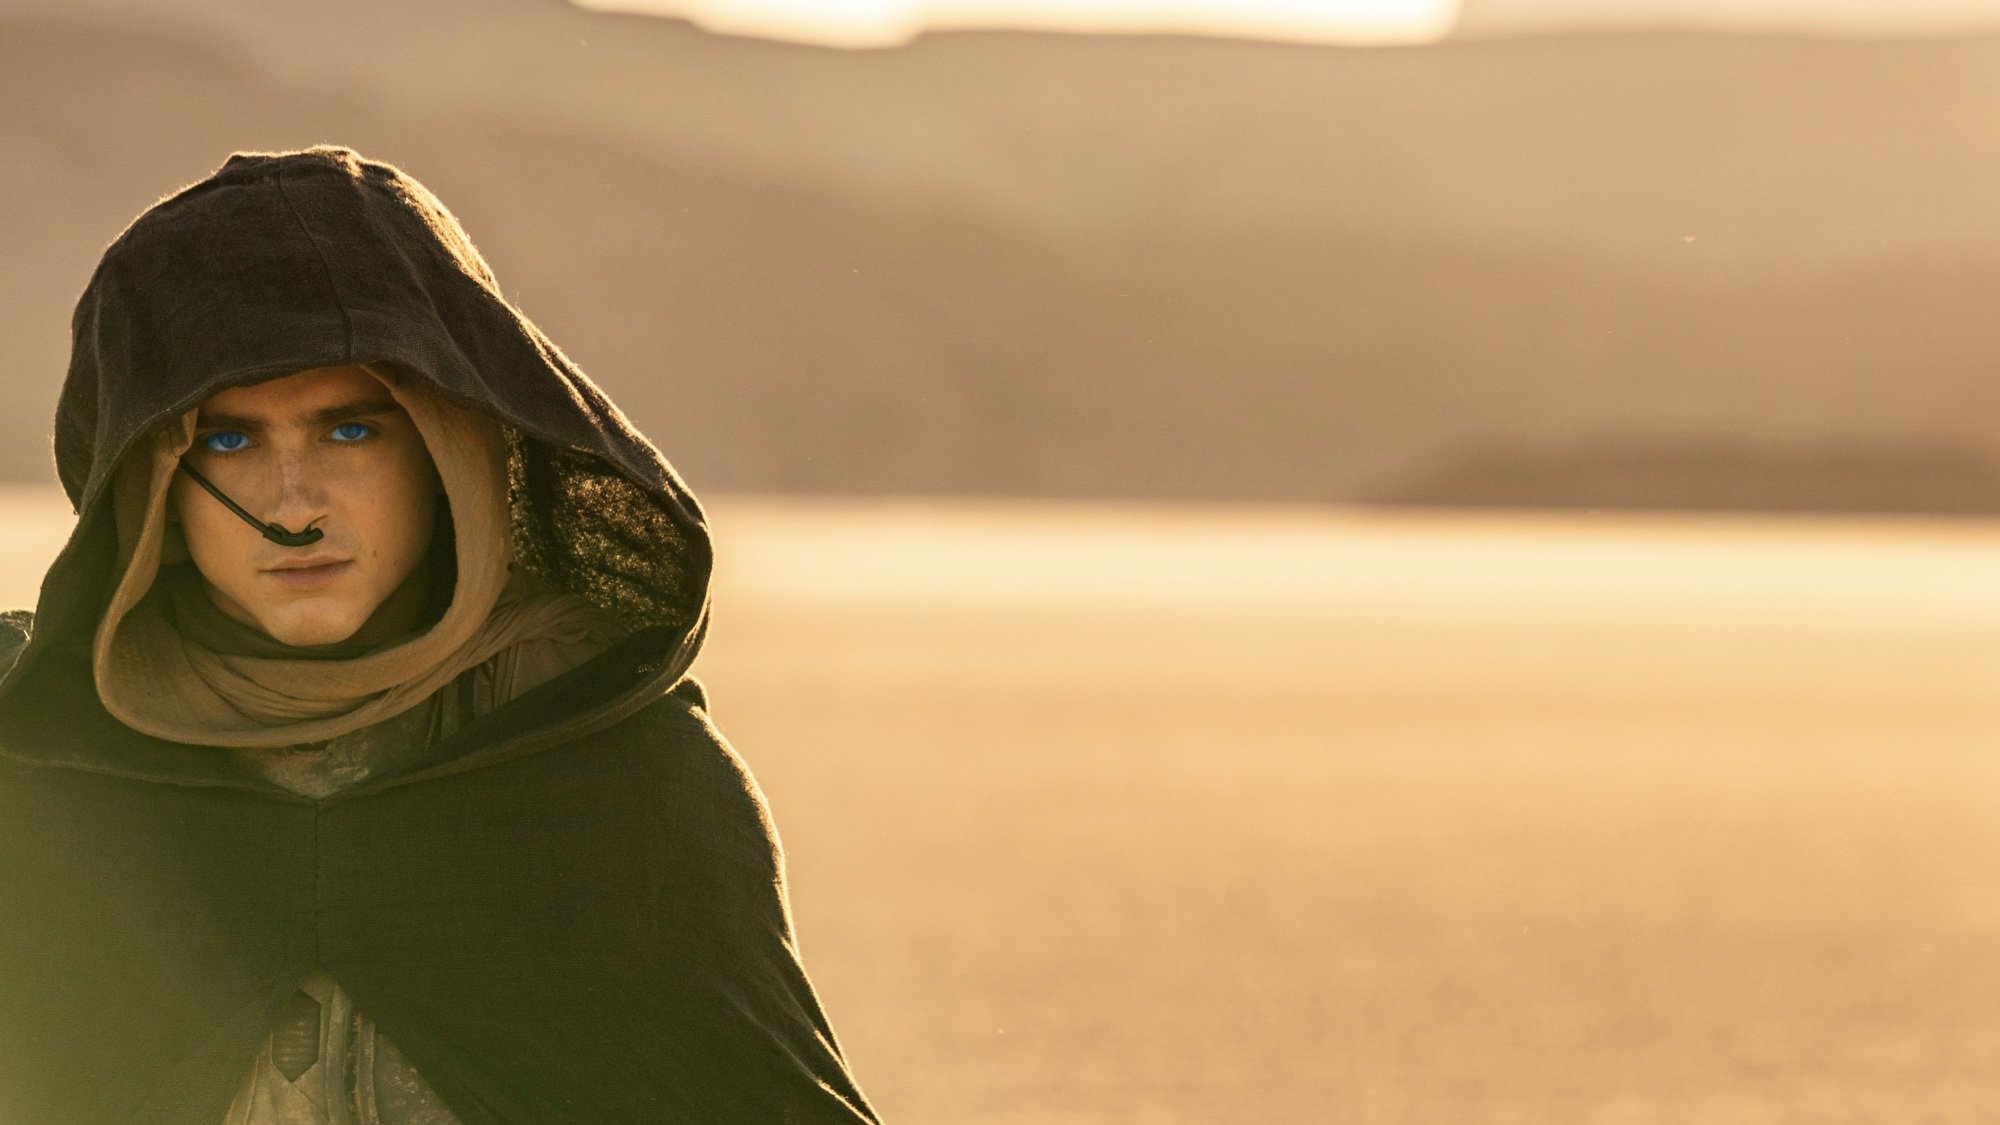 A young man with bright blue eyes walks through the desert in a dark, hooded cloak.